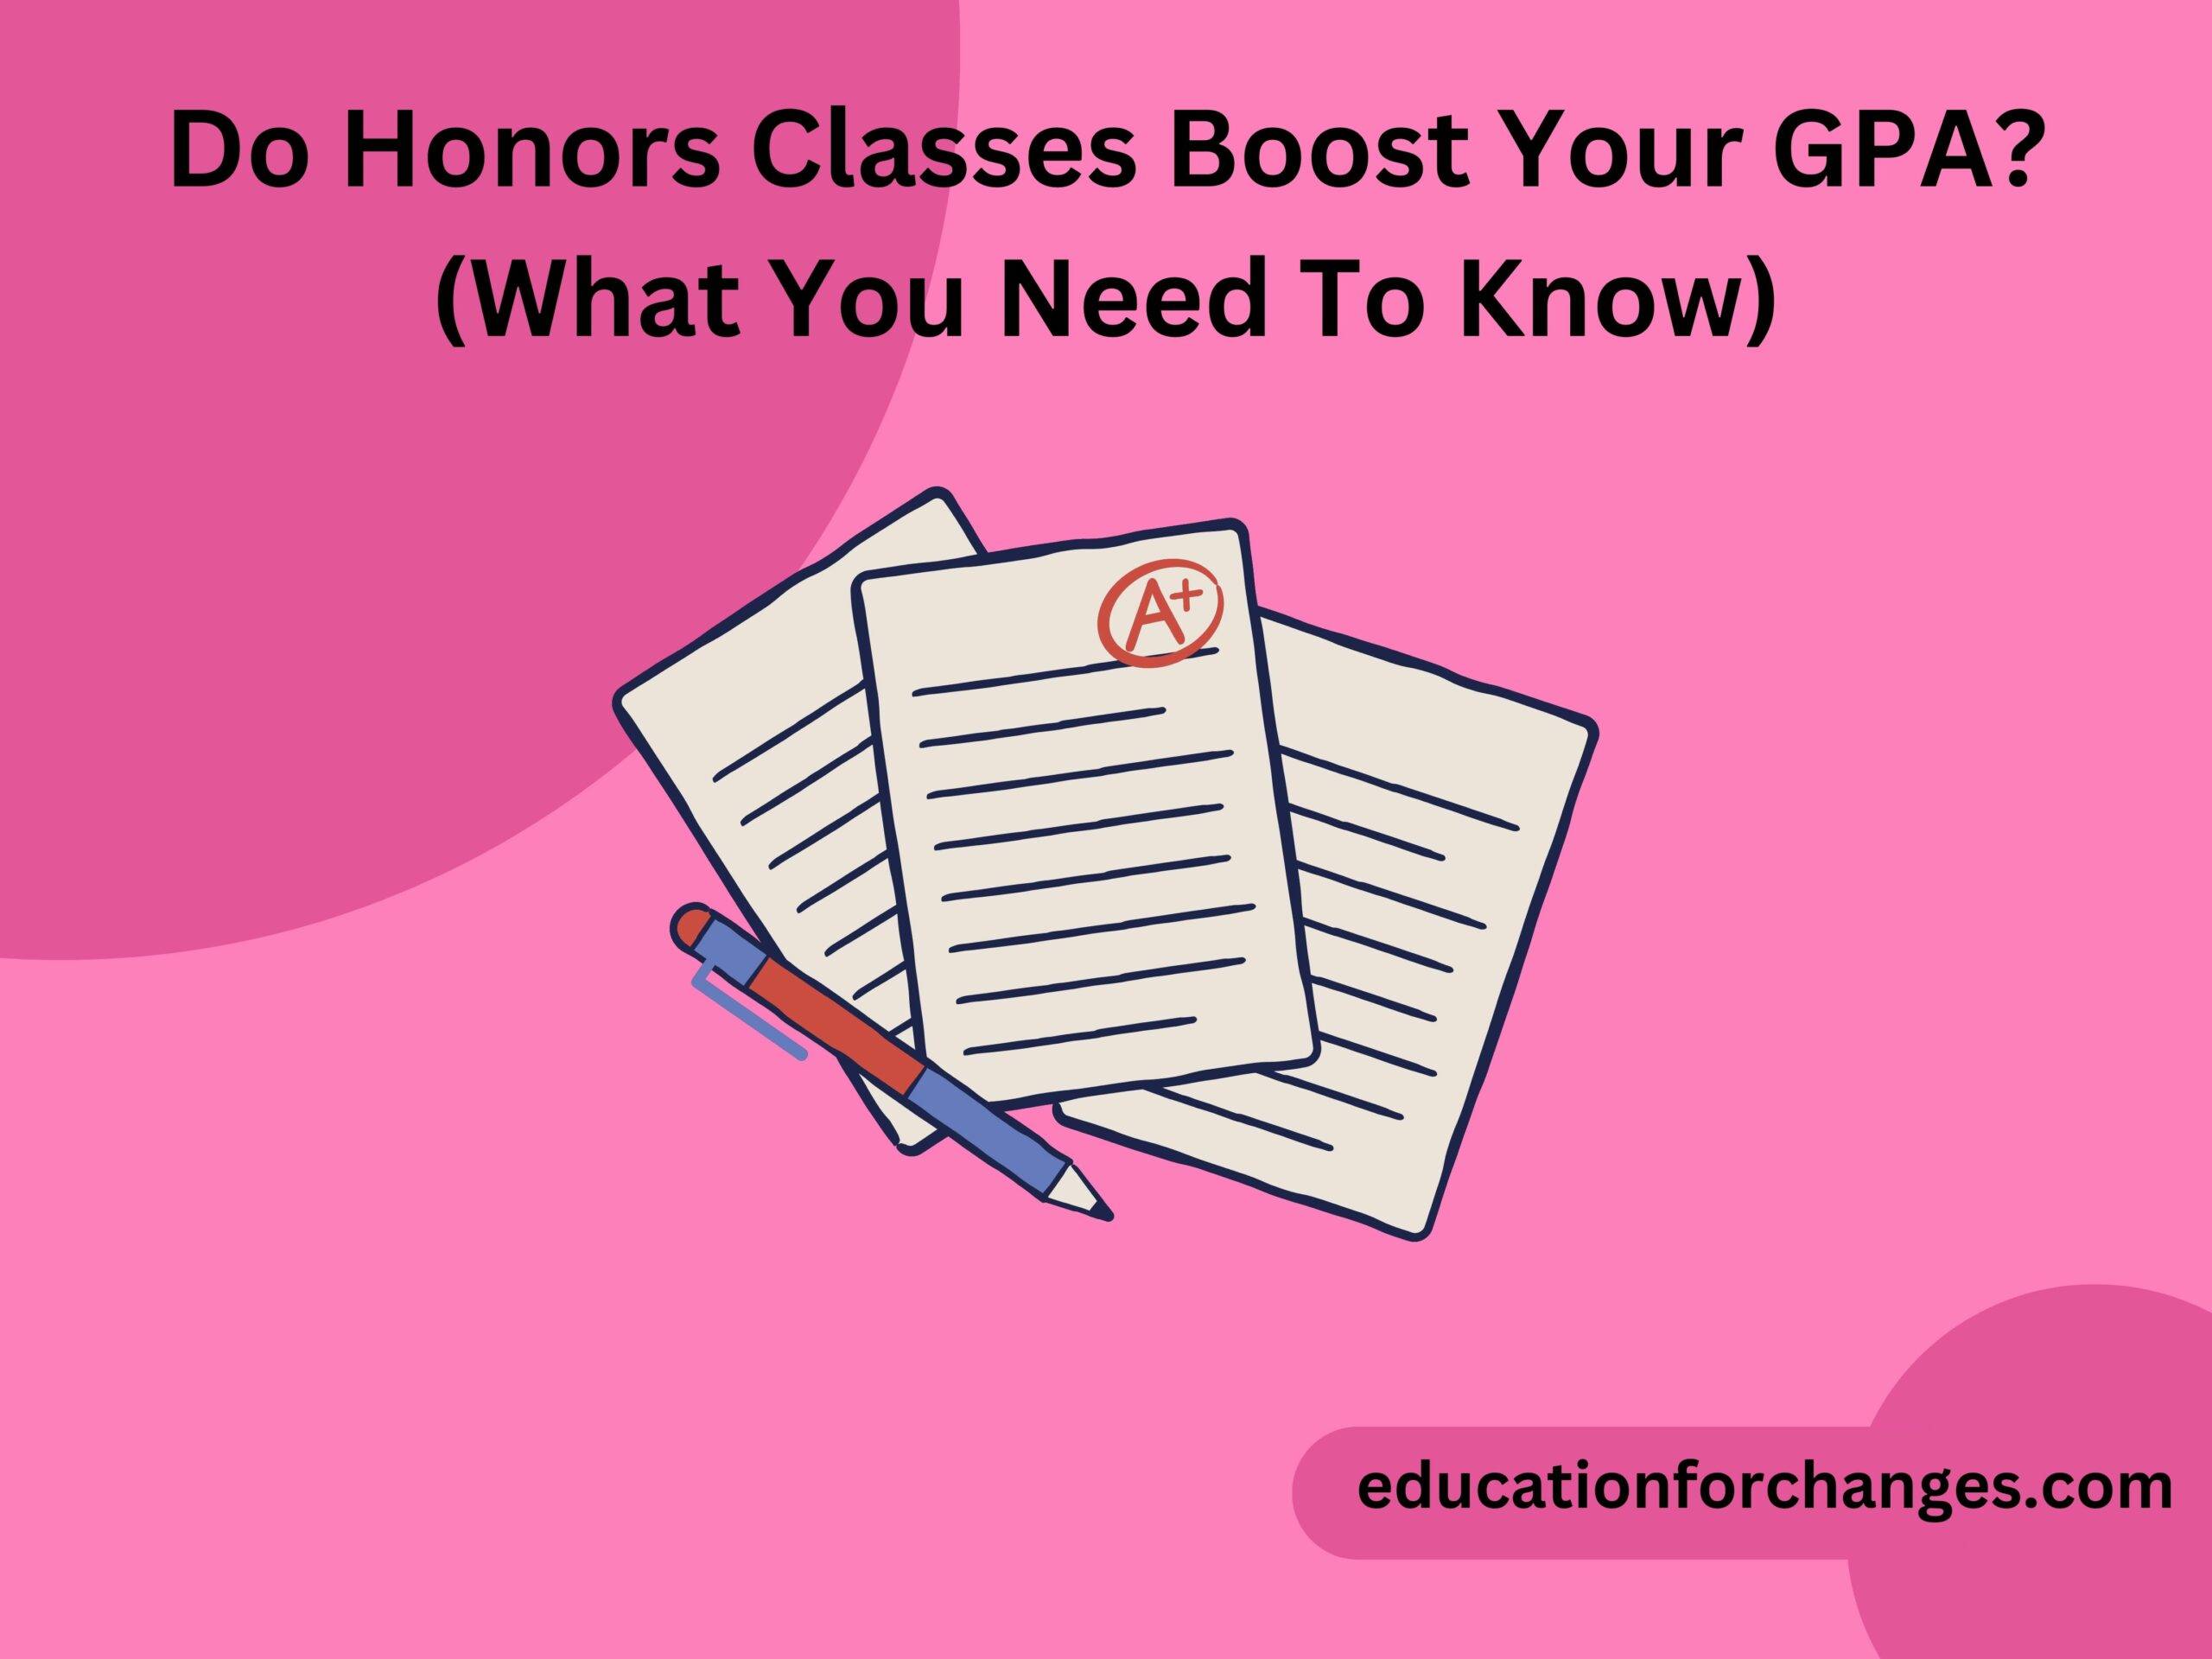 Do Honors Classes Boost Your GPA? (What You Need To Know)